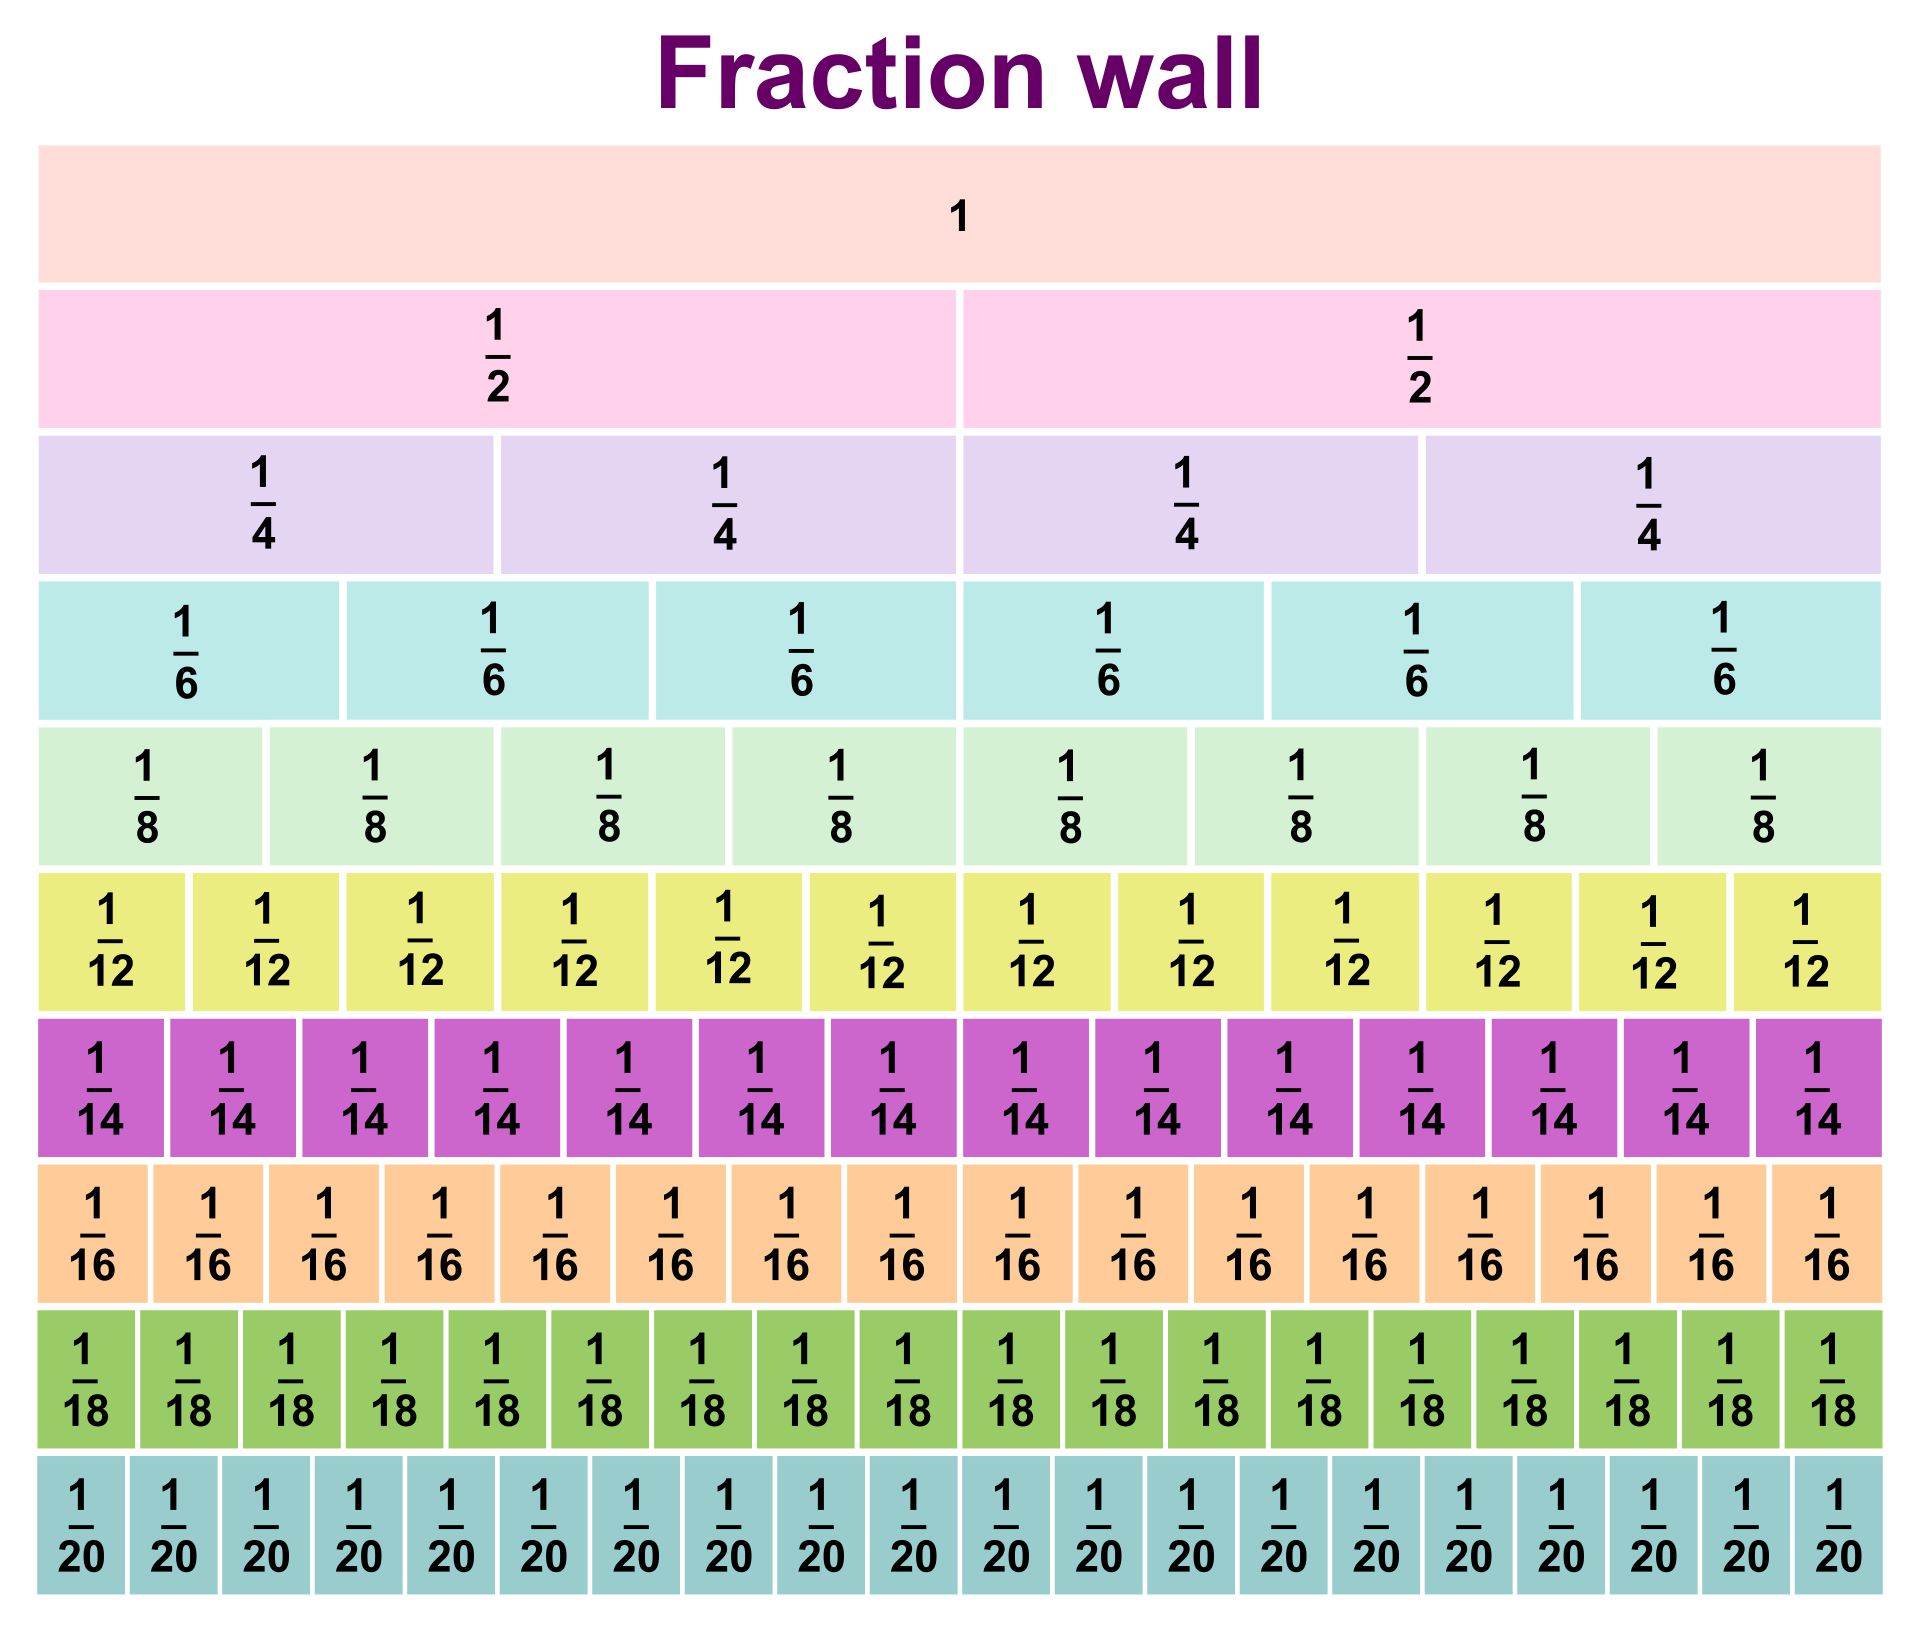 Equivalent Fractions Chart Up To 20